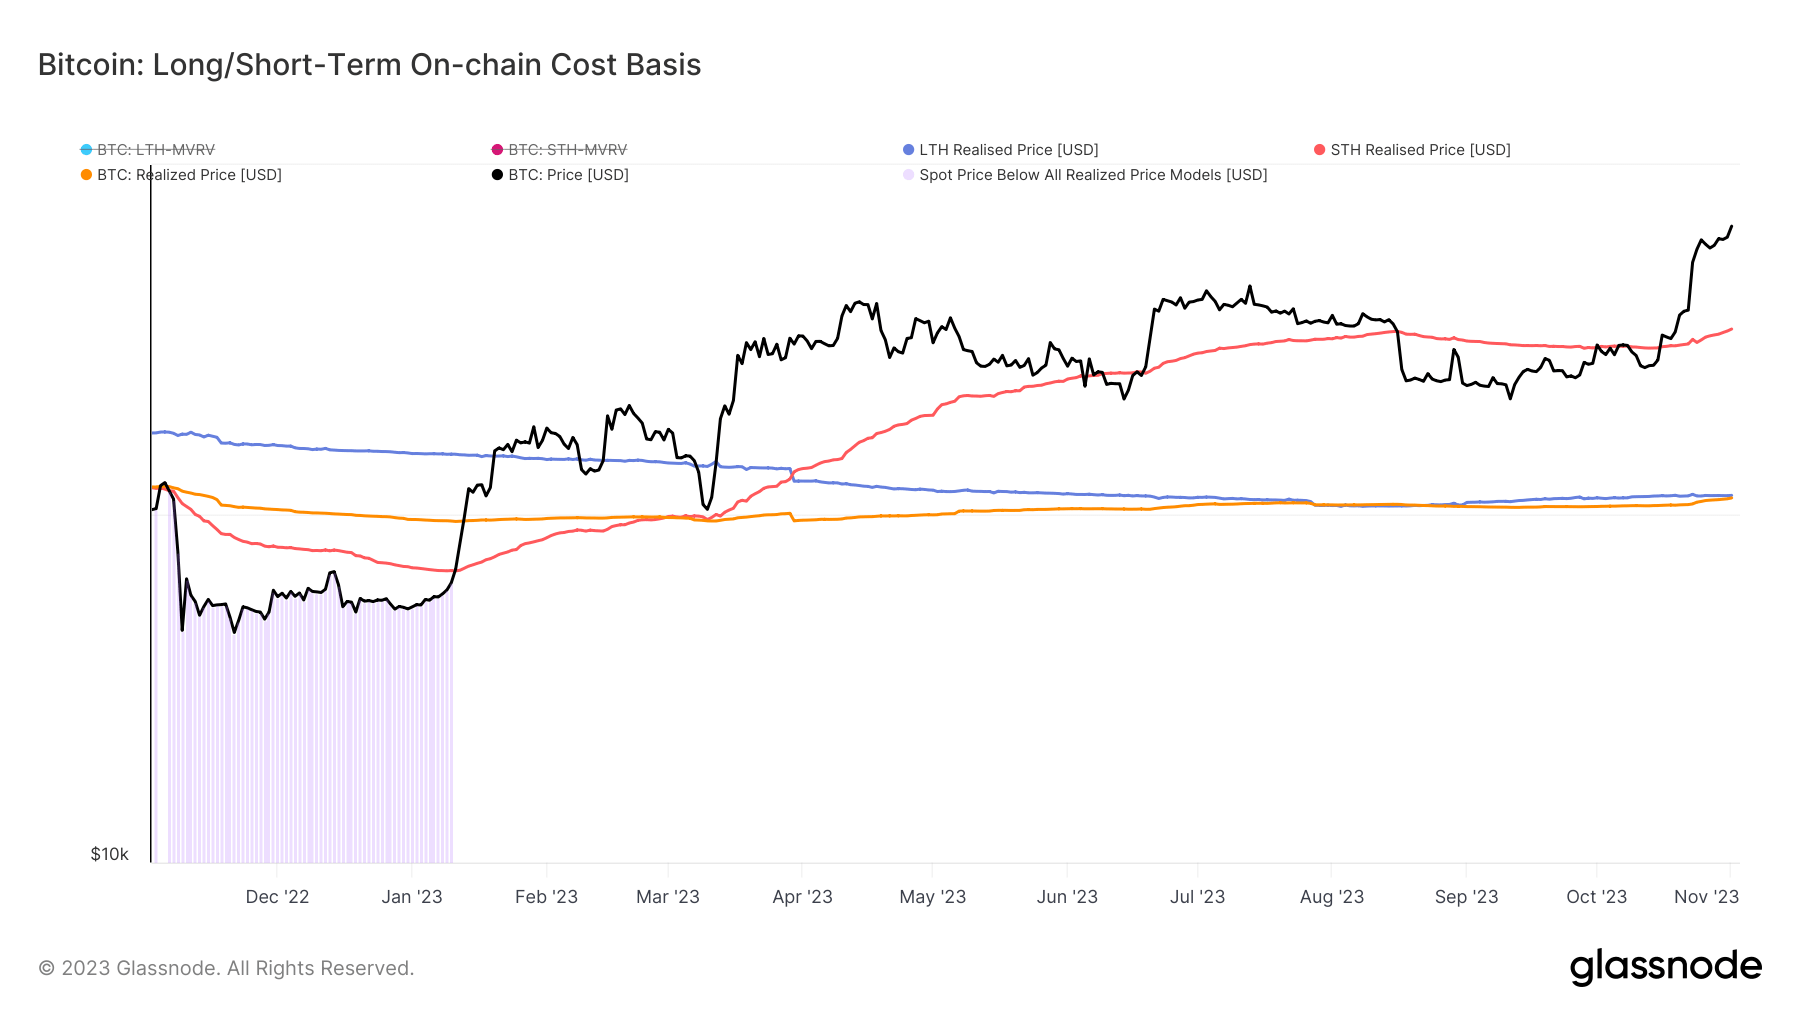 Long/short term on chain cost basis: (Source: Glassnode)